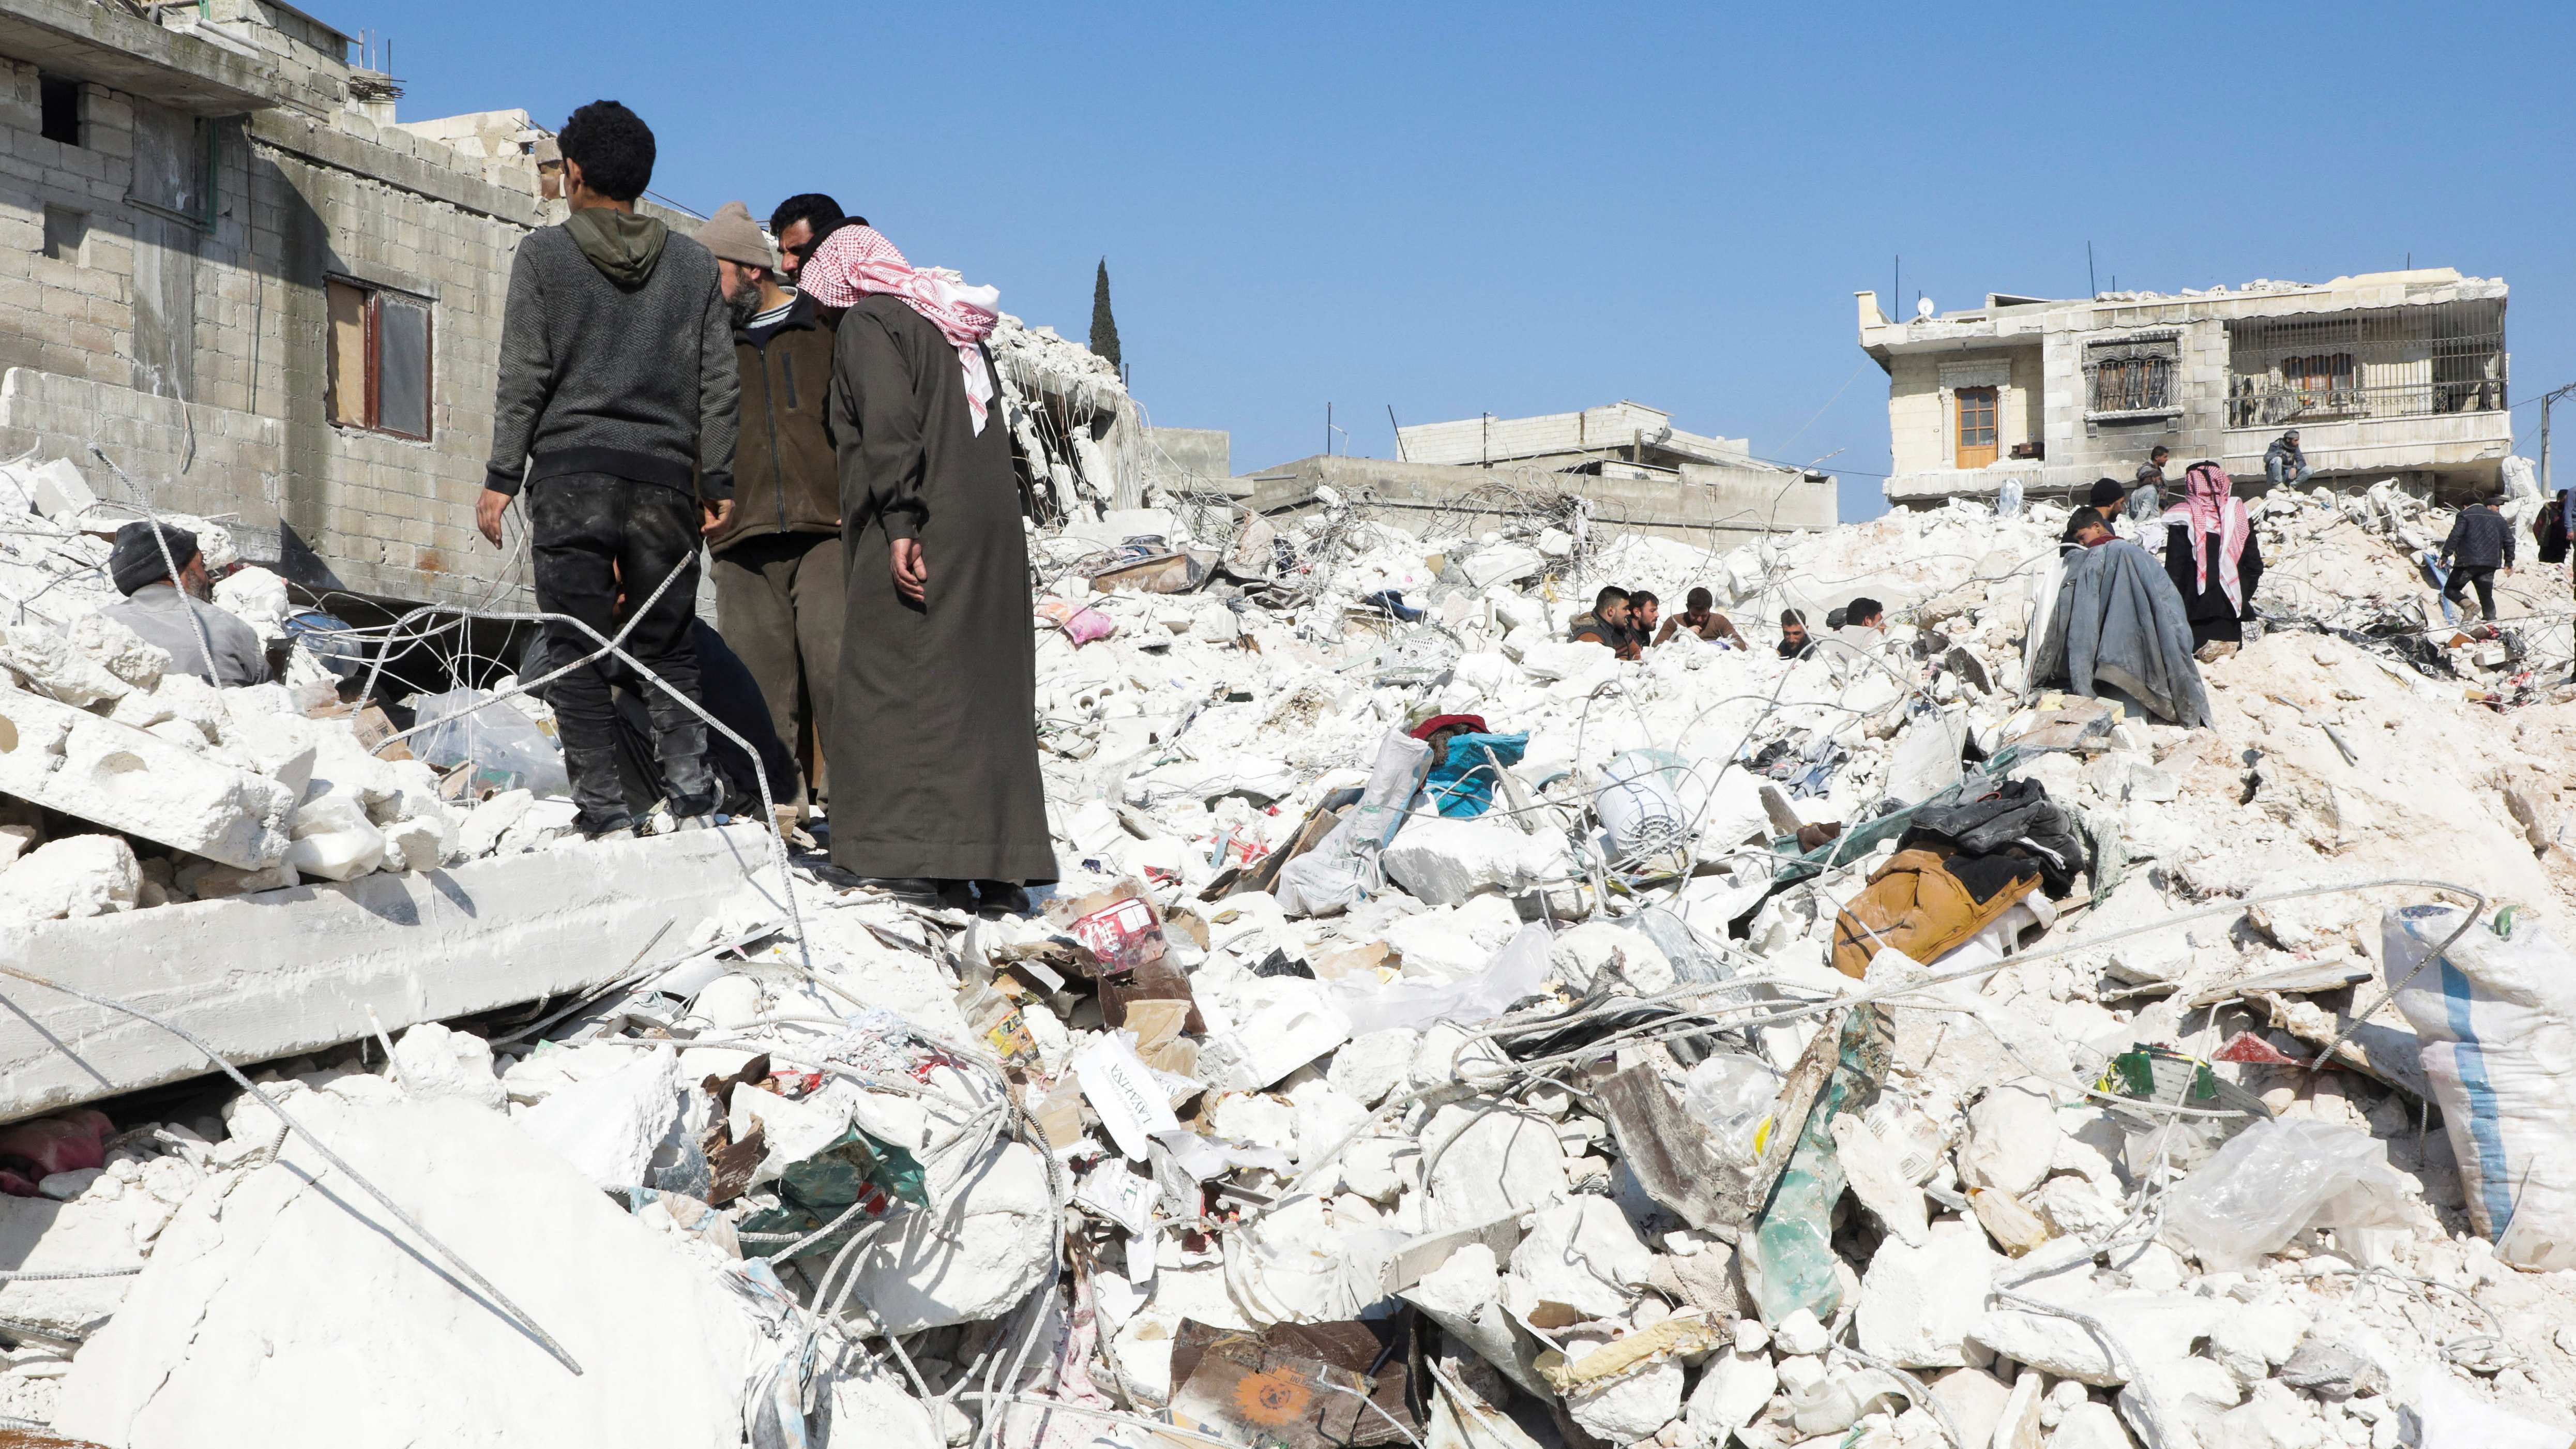 People stand on the rubble of damaged buildings in the aftermath of an earthquake, in rebel-held town of Harem, Syria February 13, 2023. Credit: Reuter Photo